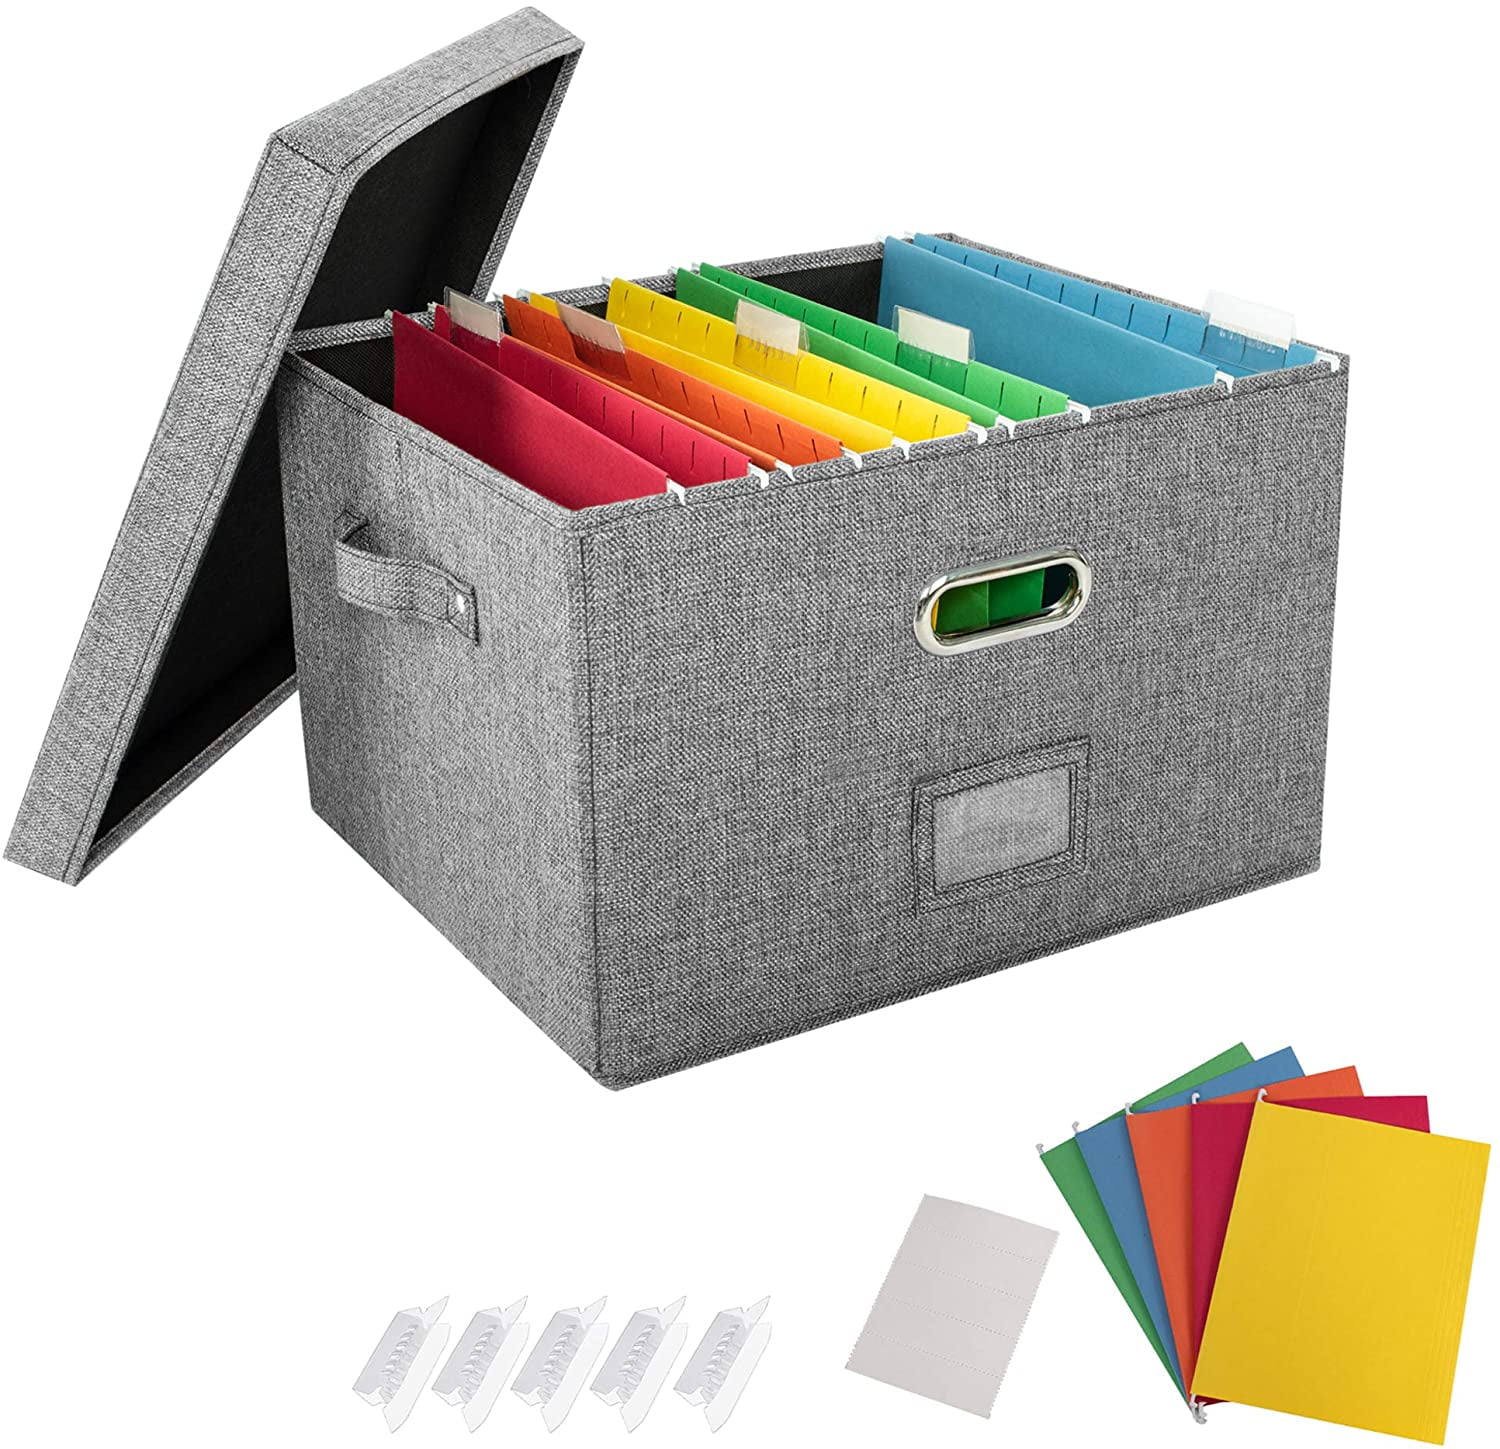 PONFM Decorative File Organizer Box Office Document Storage with Lid, Portable Collapsible Linen Hanging Filing & Storage Boxes for Office/Decor/Home (Royal